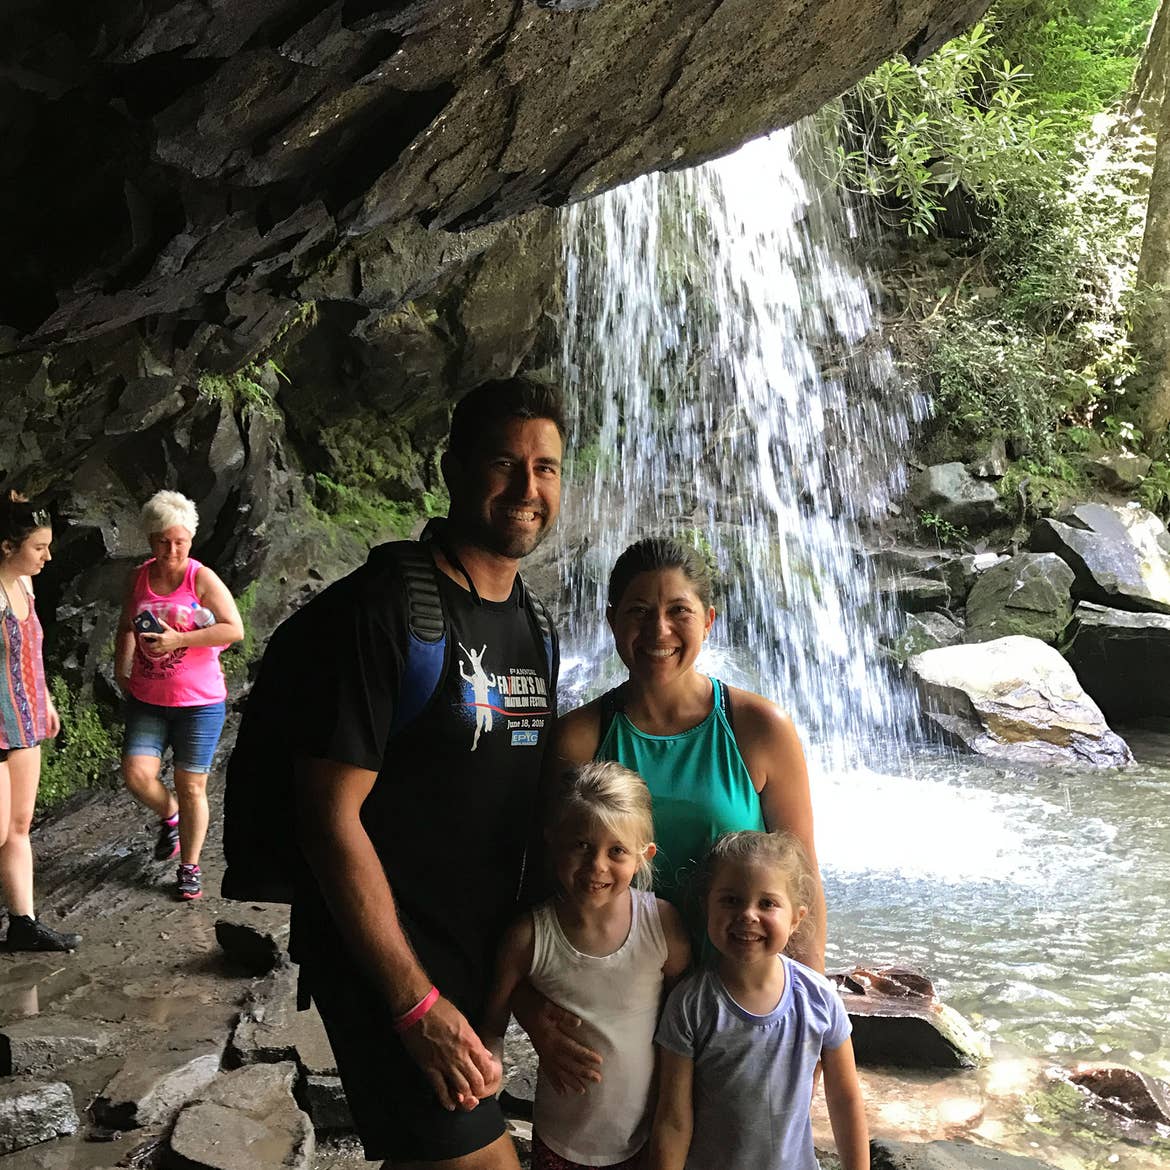 Author, Chris Johnston (back-right), stands near the Grotto Falls of the Mammoth Cave National Park with her husband, Josh (back-left), and daughters, Kyndall (front-left), and Kyler (front-right).